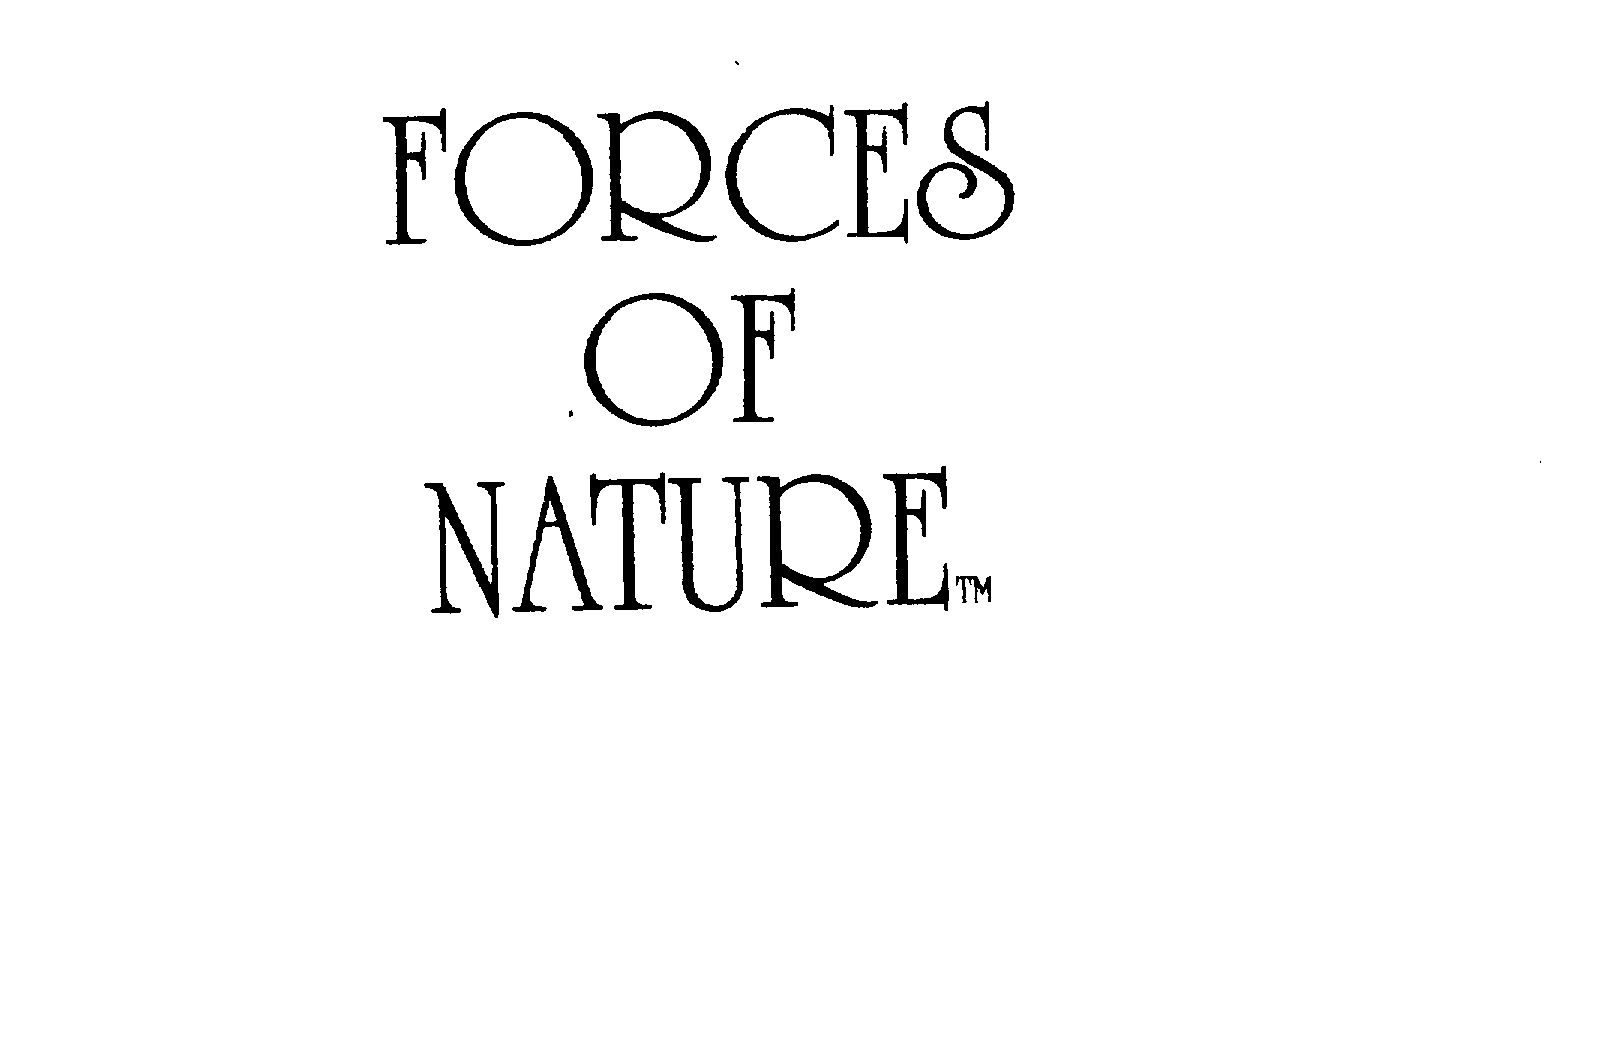 FORCES OF NATURE